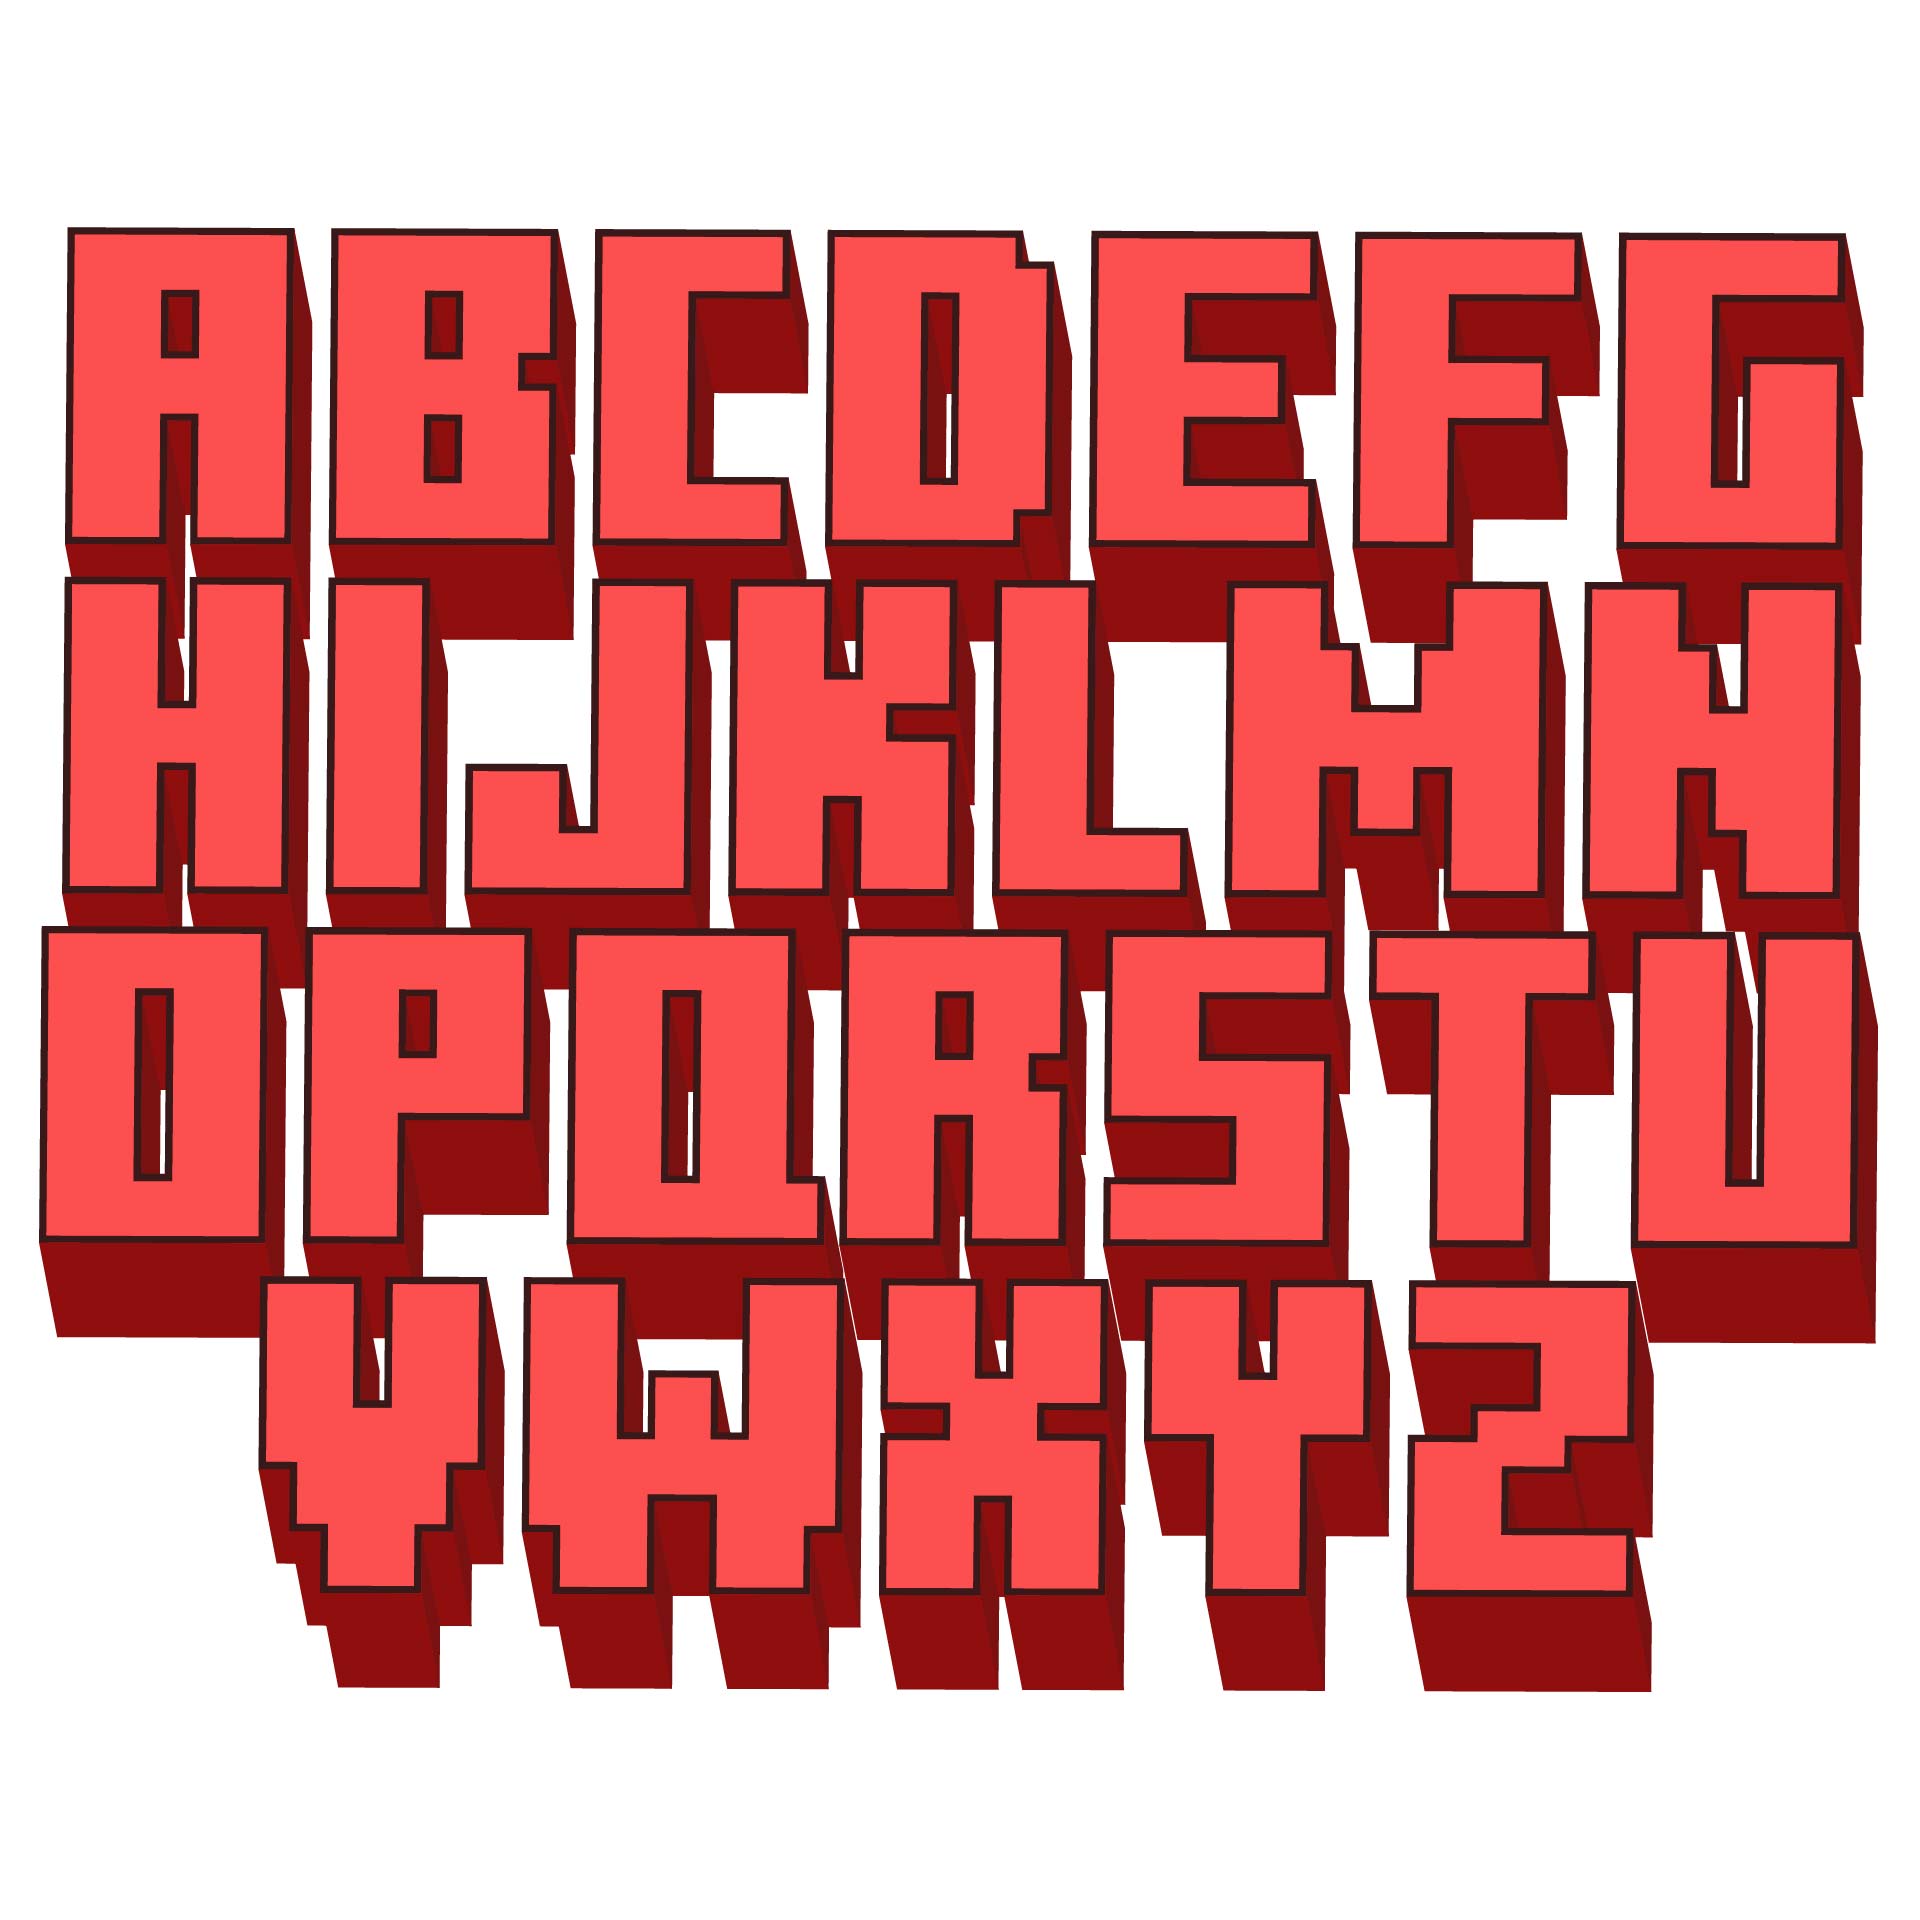 Minecraft Letters